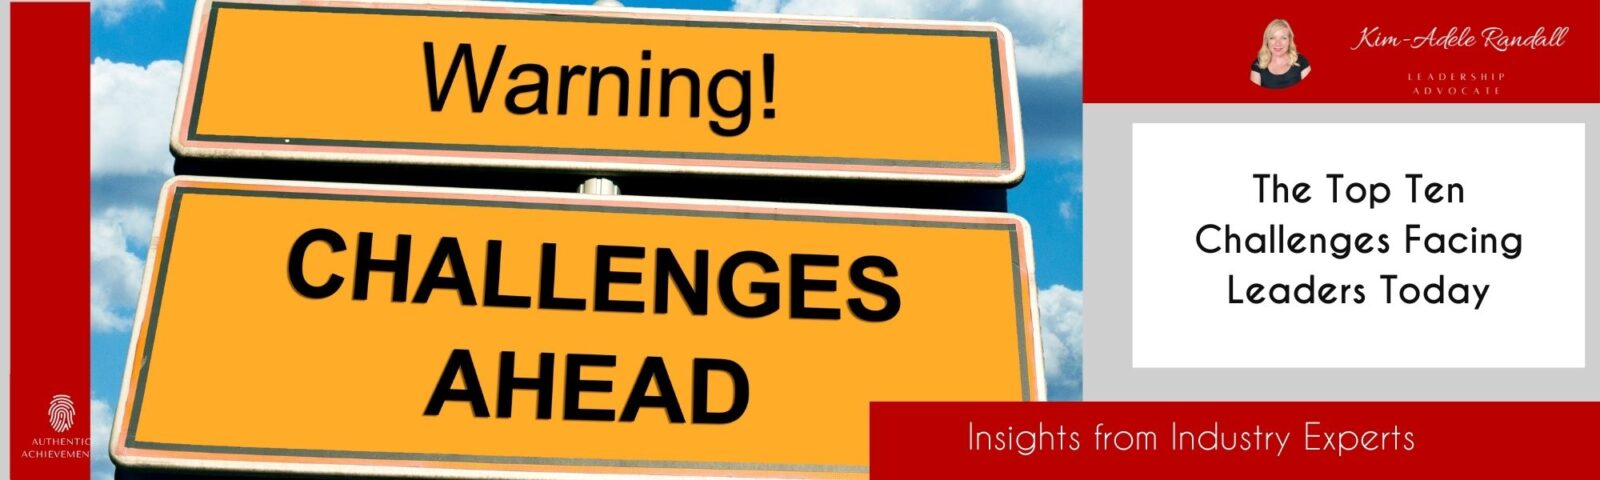 The Top Ten Challenges Facing Leaders Today: Insights from Industry Experts